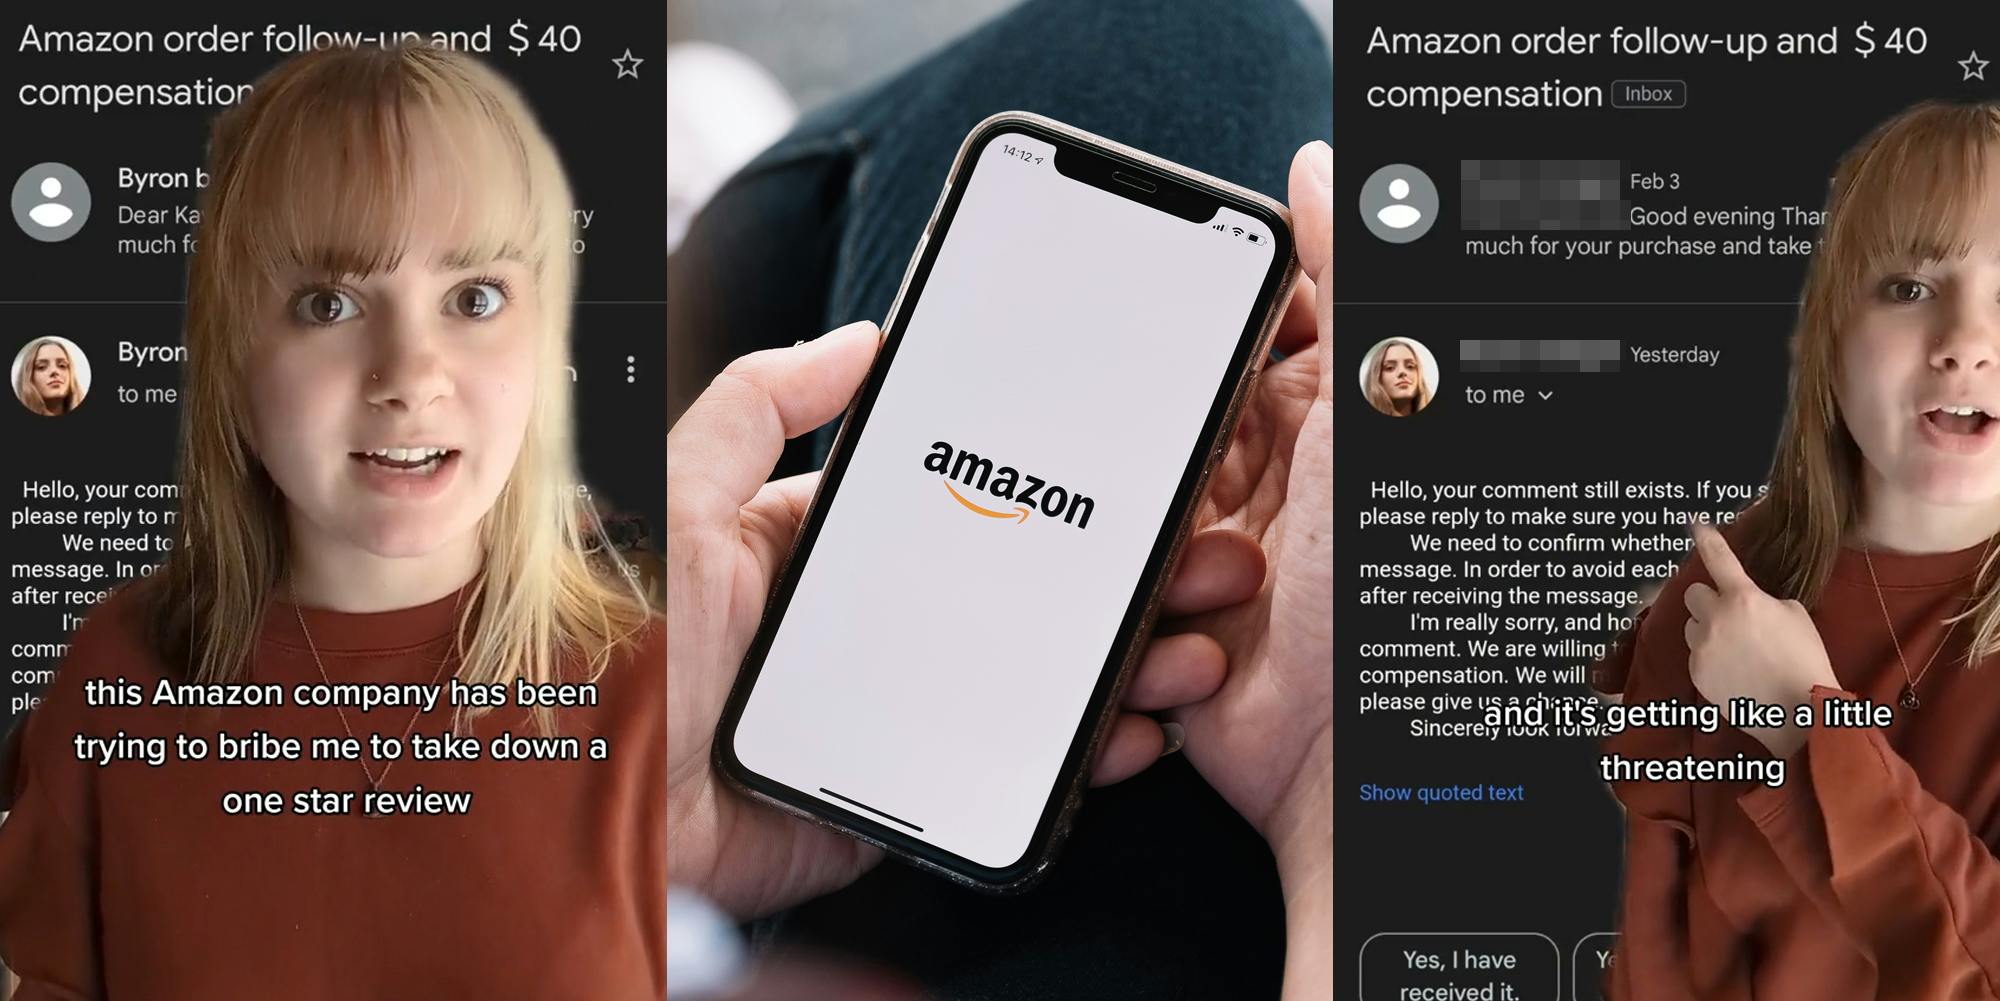 woman greenscreen TikTok over email with caption "this Amazon company has been trying to bribe me to take down a one star review" (l) Amazon on phone in hands (c) woman greenscreen TikTok over email with caption "and it's getting like a little threatening" (r)